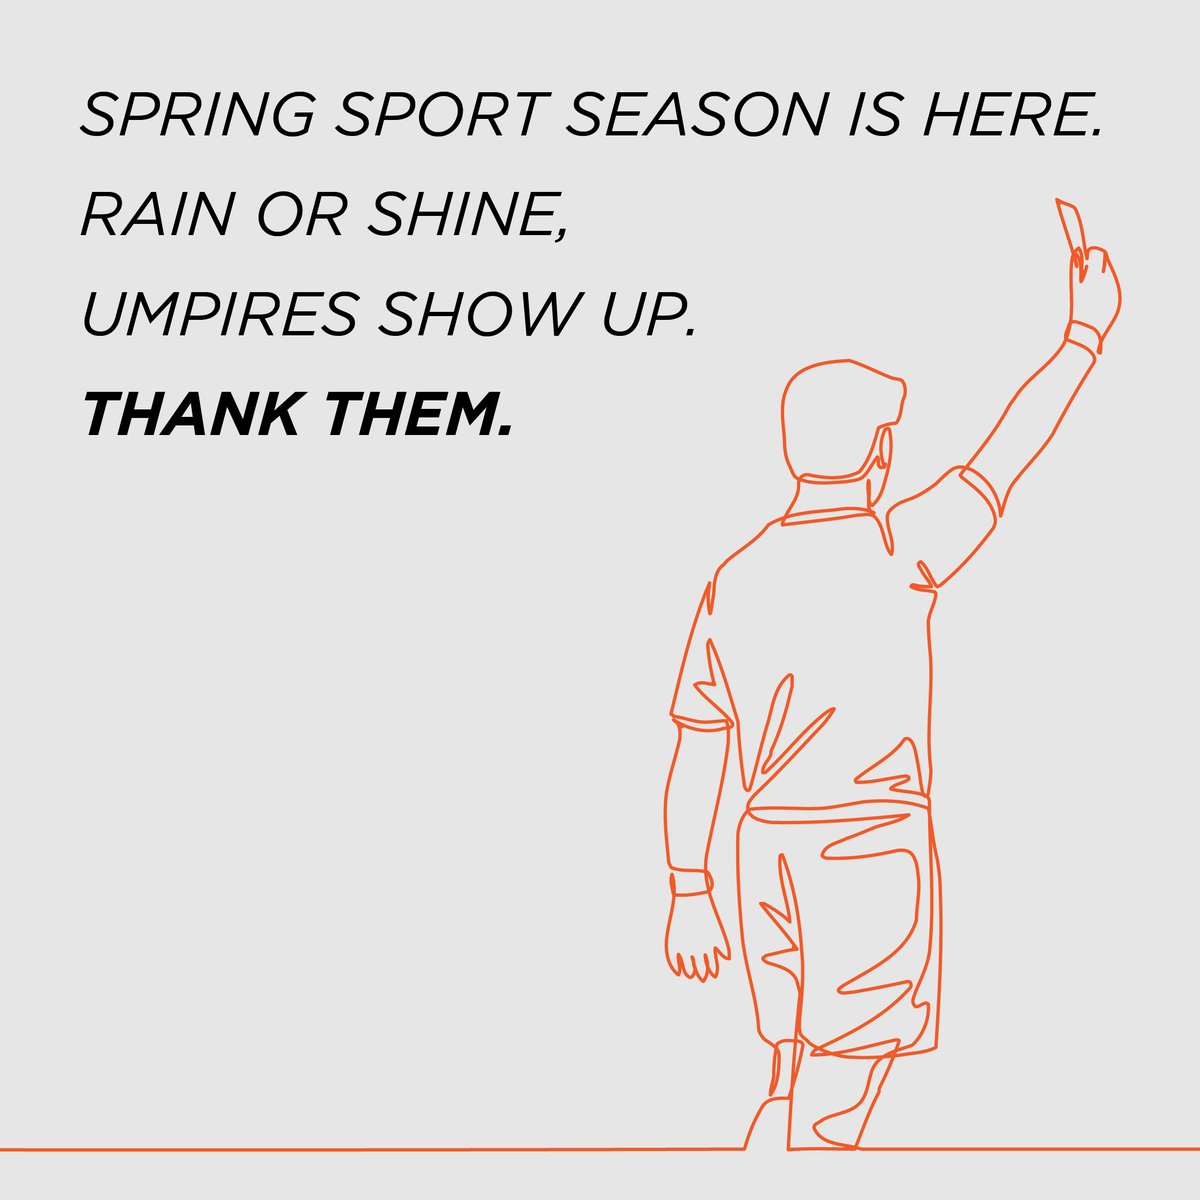 Spring has sprung and so has sport season! But let's give a soggy salute to our valiant officials who come rain or shine, armed only with their trusty whistles. Next time it pours, don't just don't just thank the heavens for the game, thank the drenched decision-makers too!